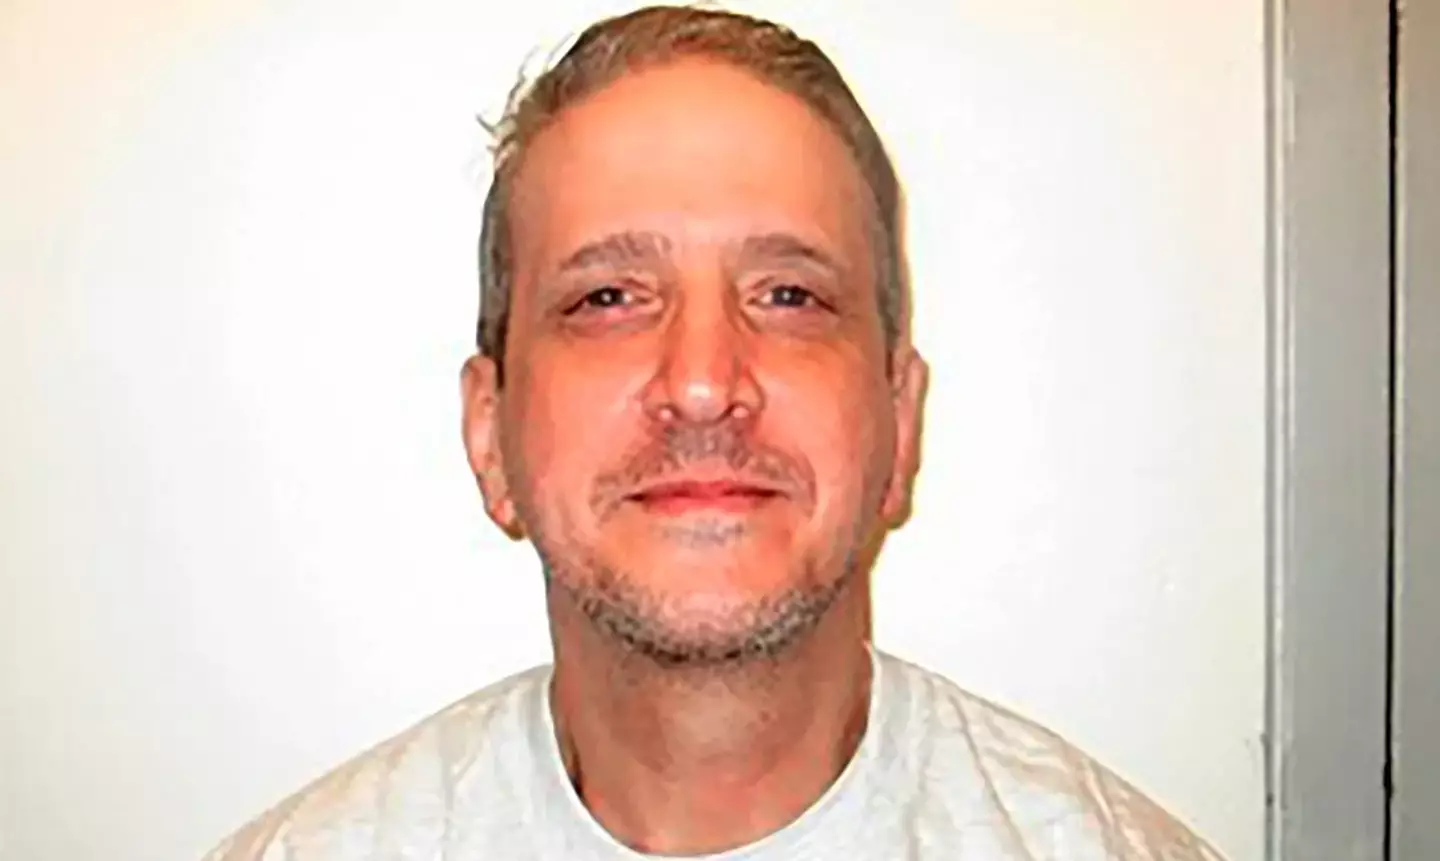 Glossip has spent 24 years on death row.